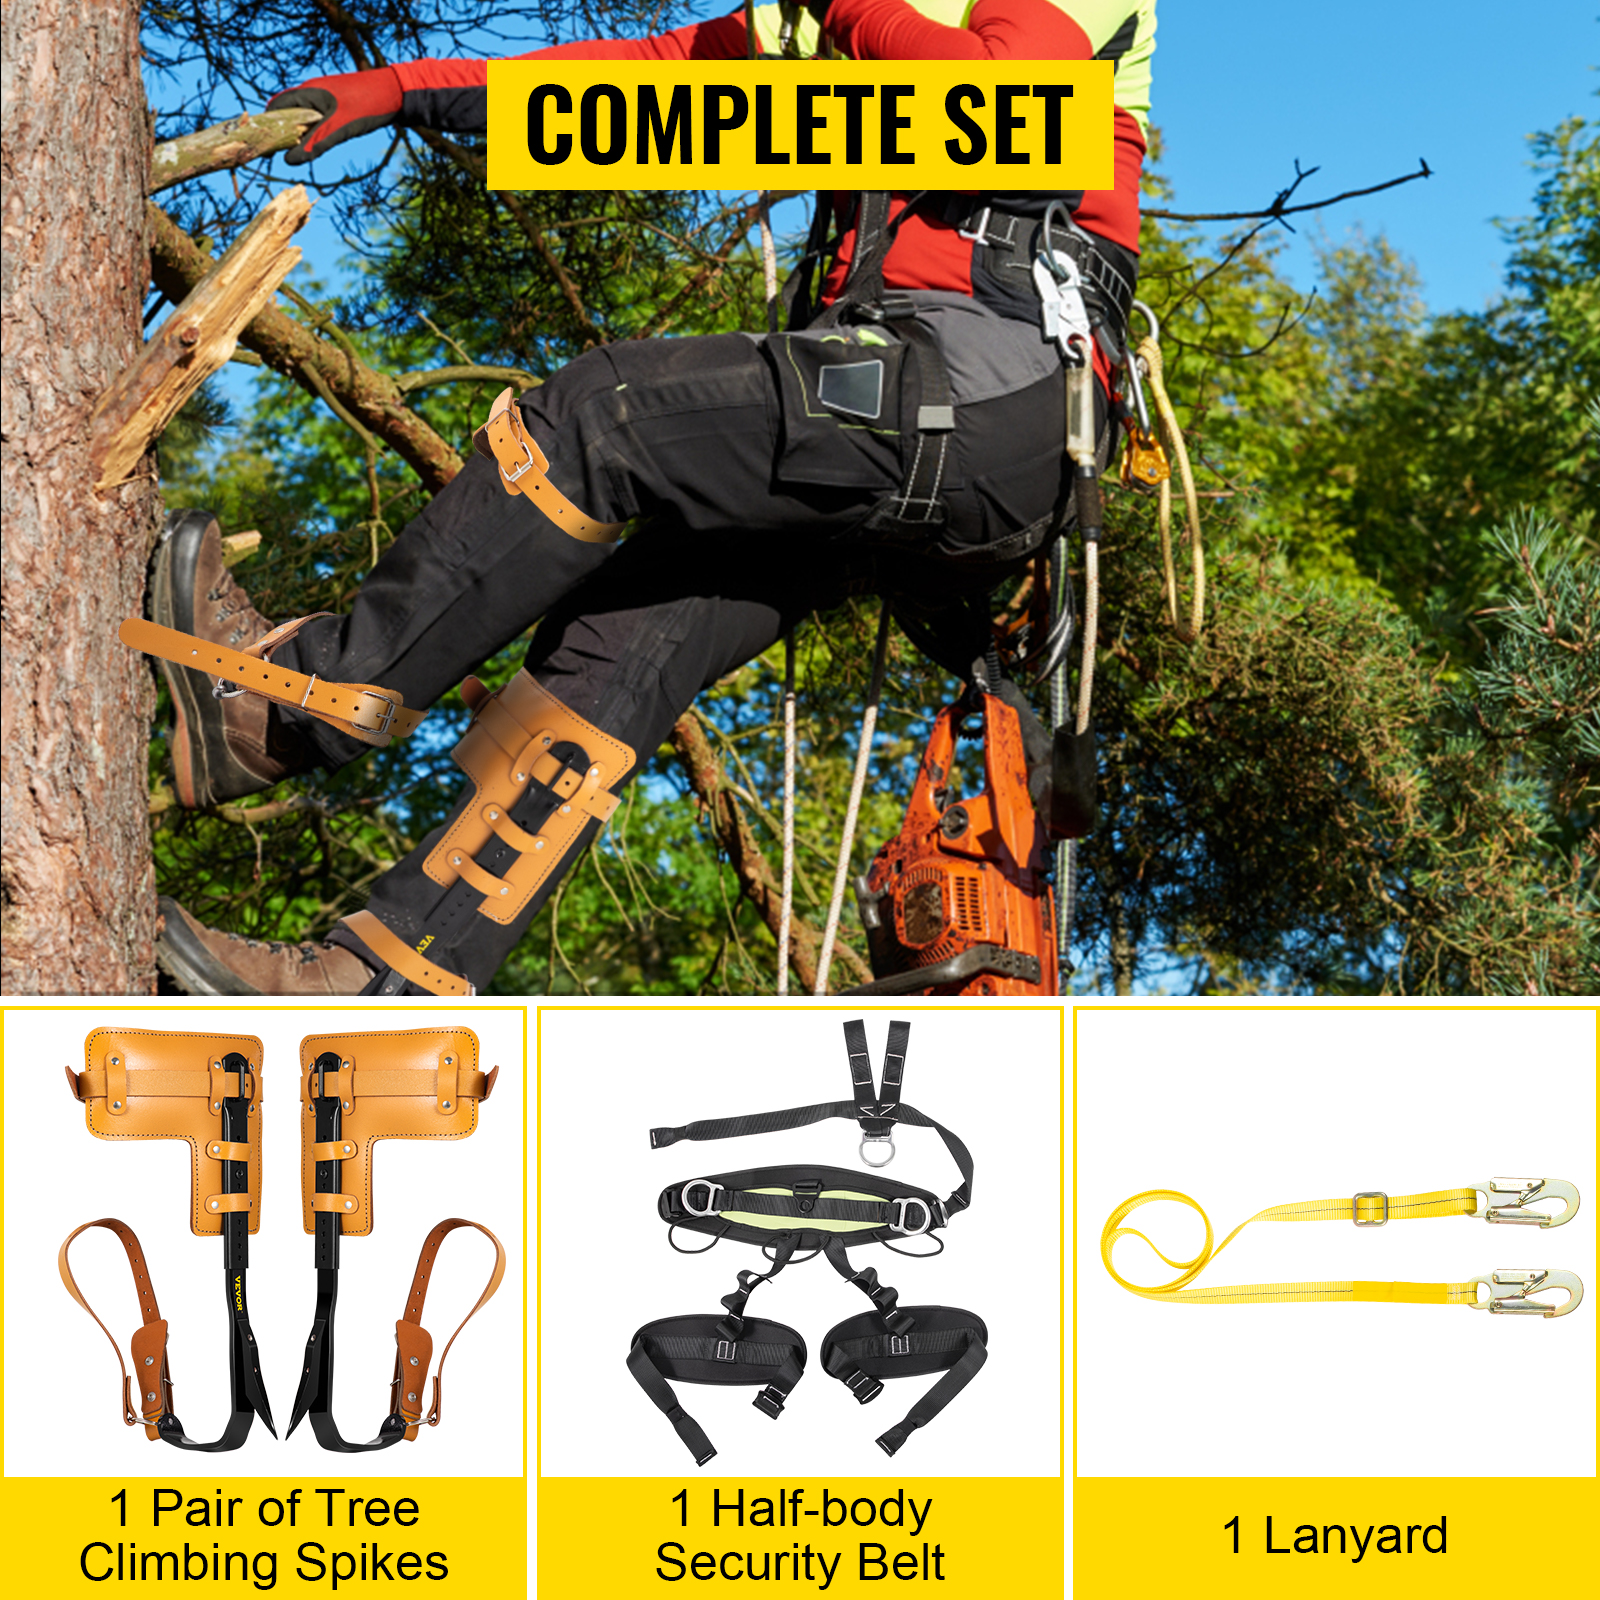 Tree Pole Climbing Spike Set 1/2 Gears Steel Claw Climbing Tree Spikes With  Adjustable Safety Belt